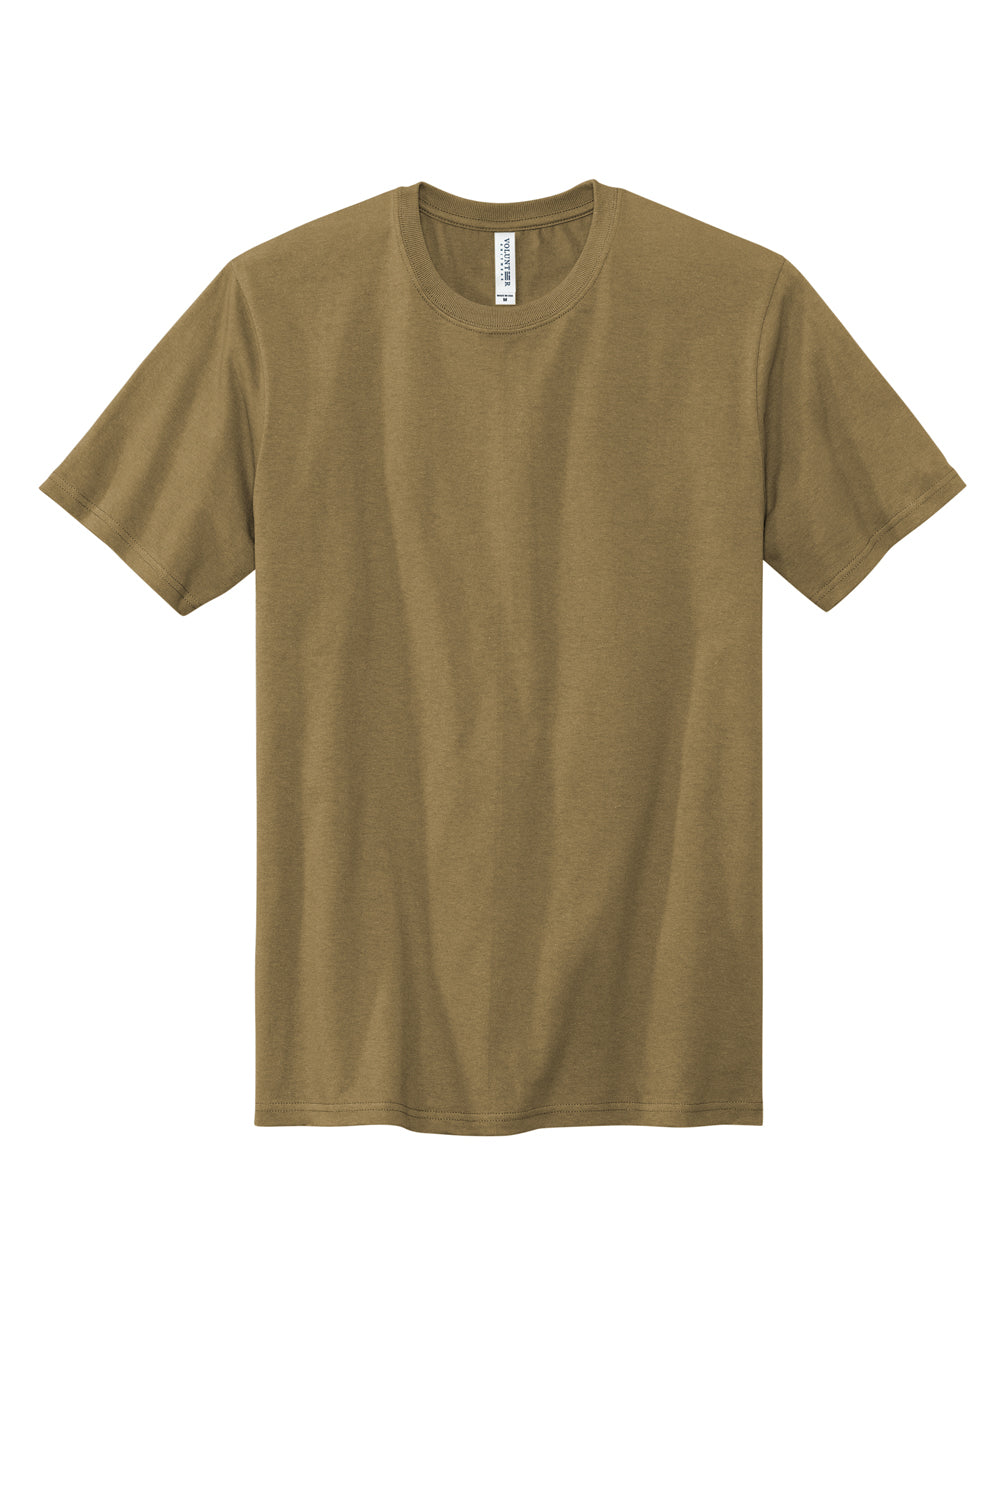 Volunteer Knitwear VL100 USA Made All American Short Sleeve Crewneck T-Shirts Coyote Brown Flat Front